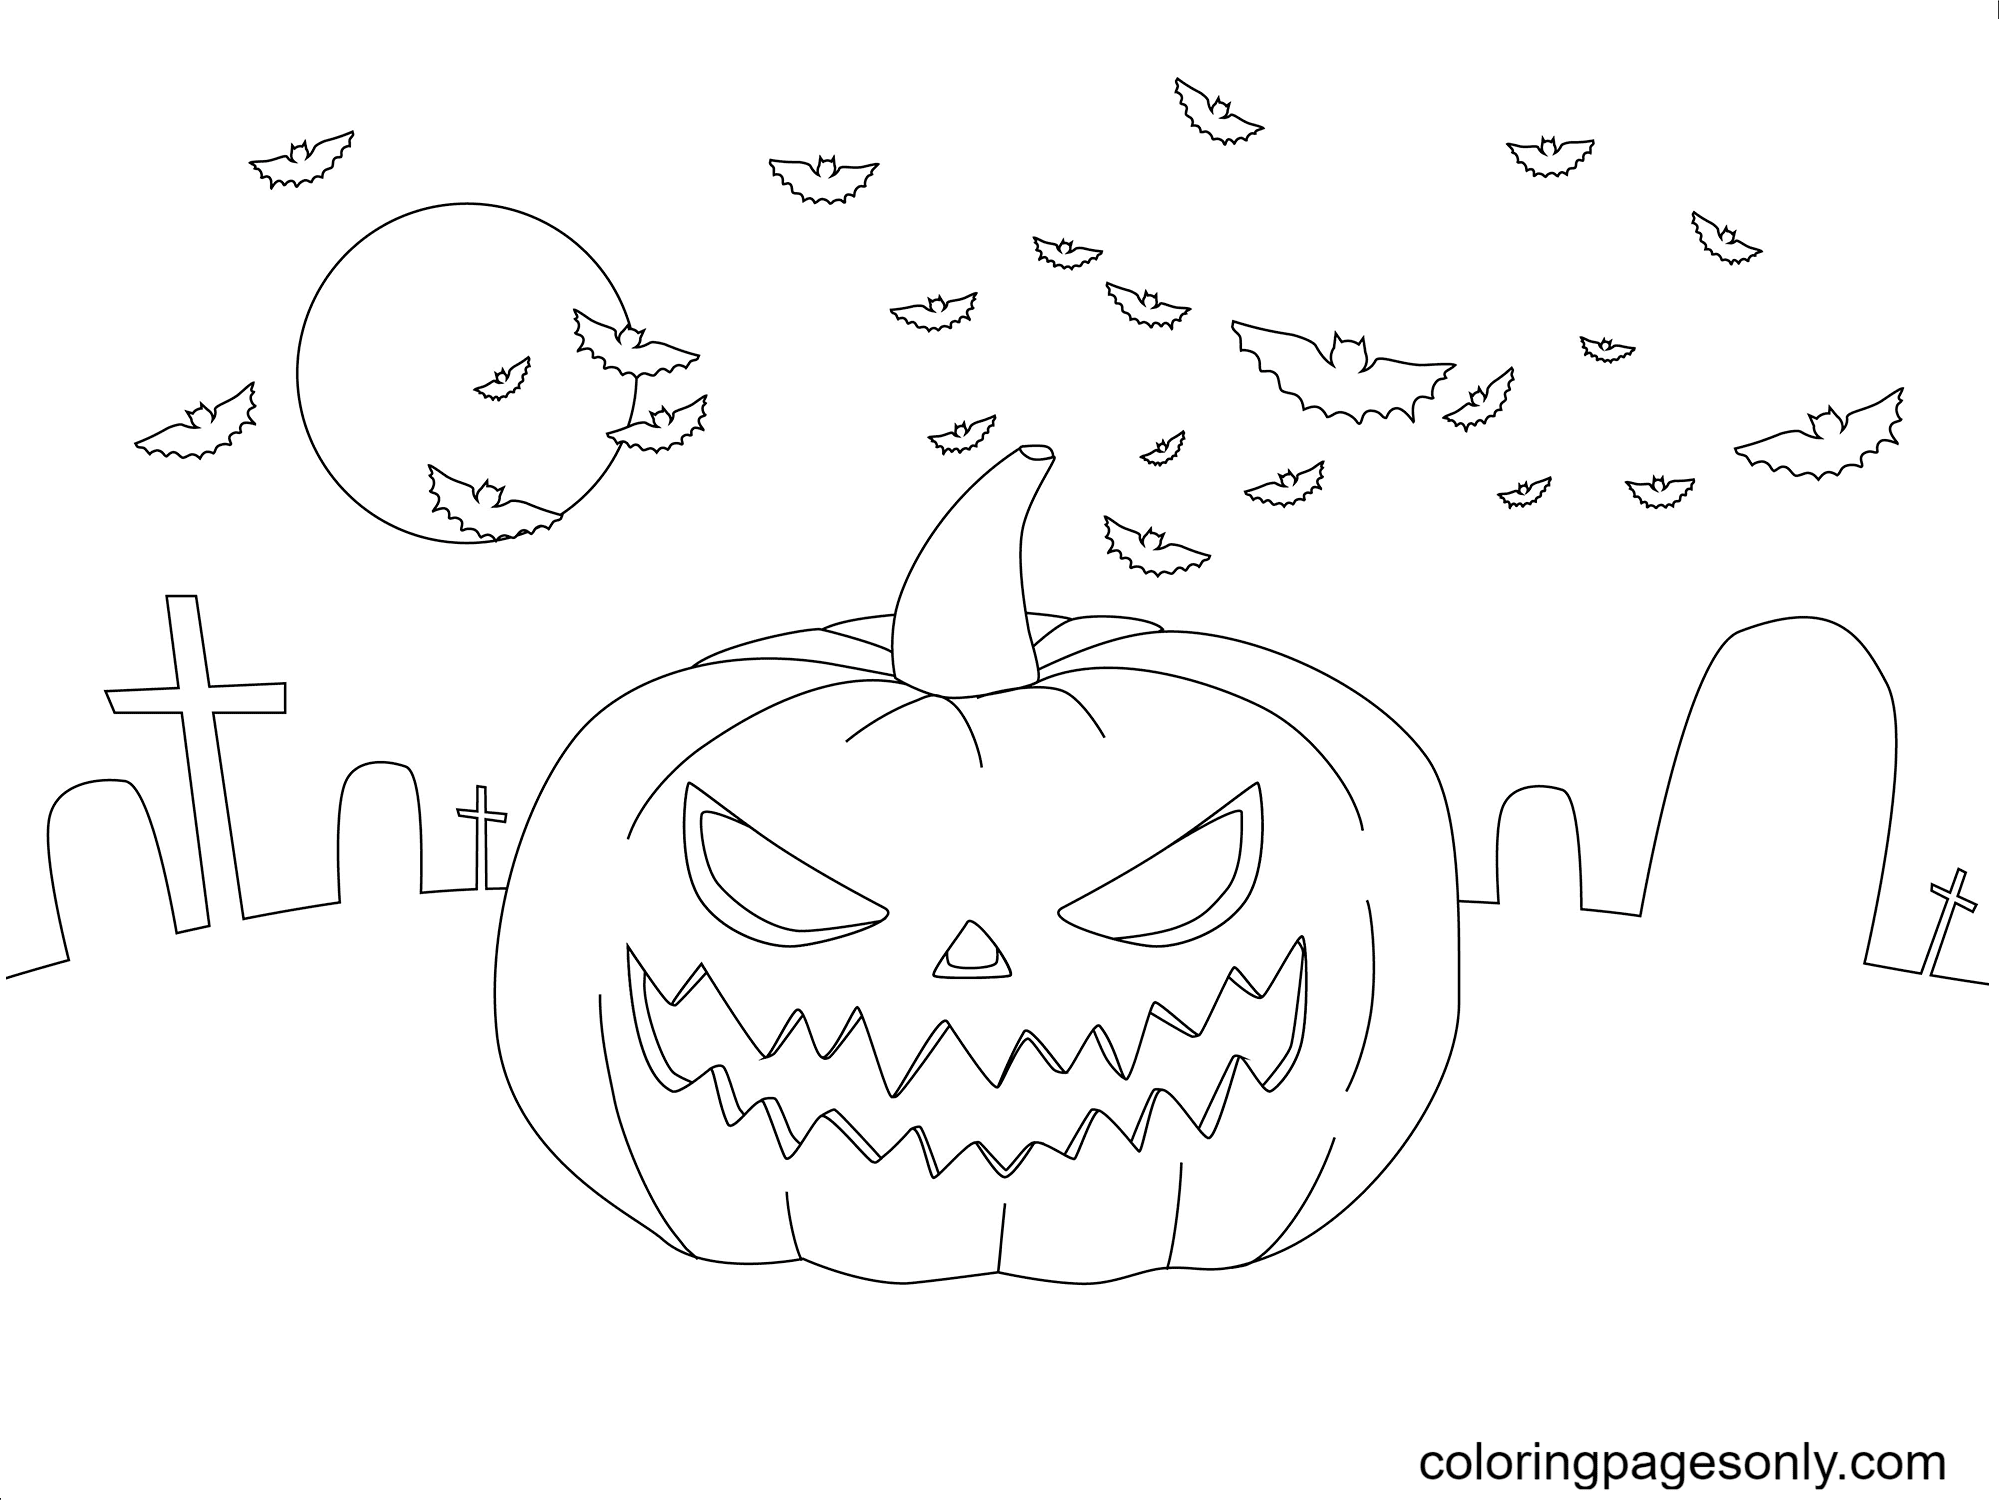 Jack-o’-lantern and bat Coloring Pages